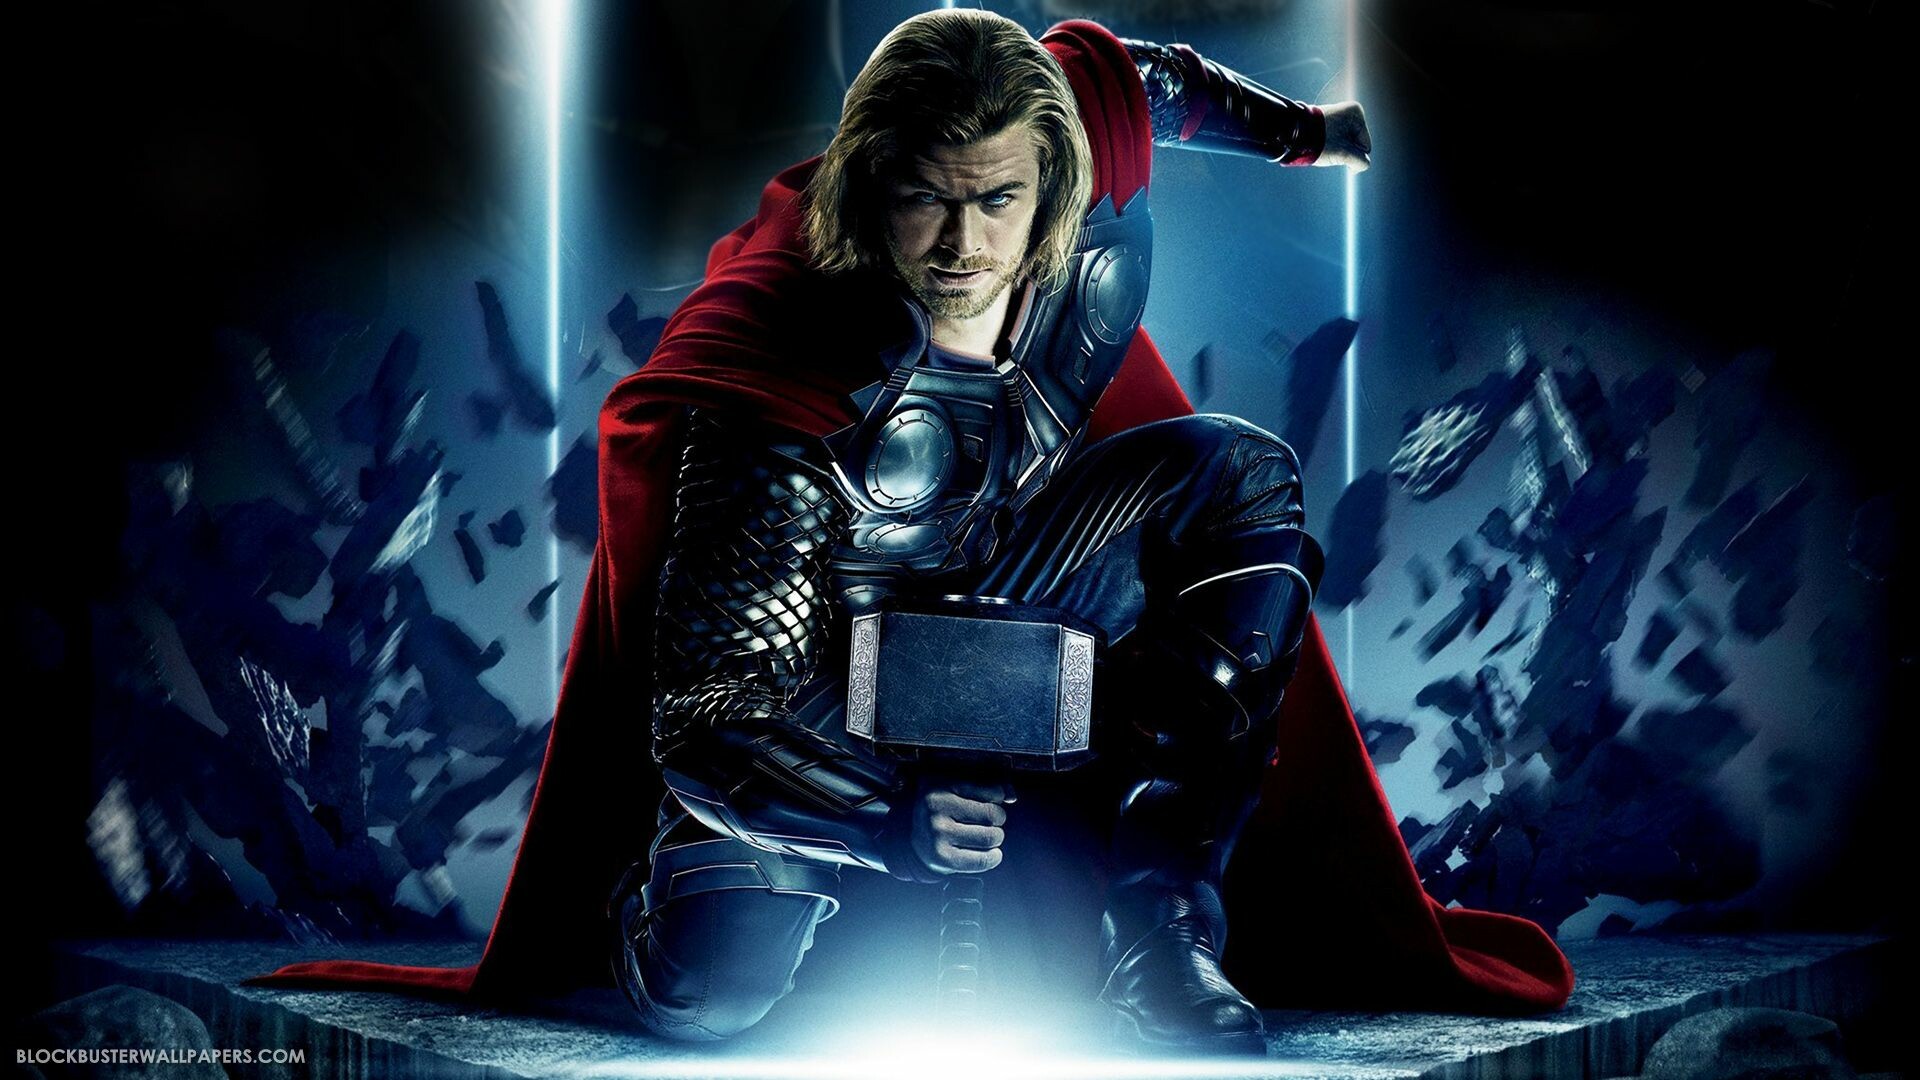 44+ Thor Wallpapers: HD, 4K, 5K for PC and Mobile | Download free images  for iPhone, Android